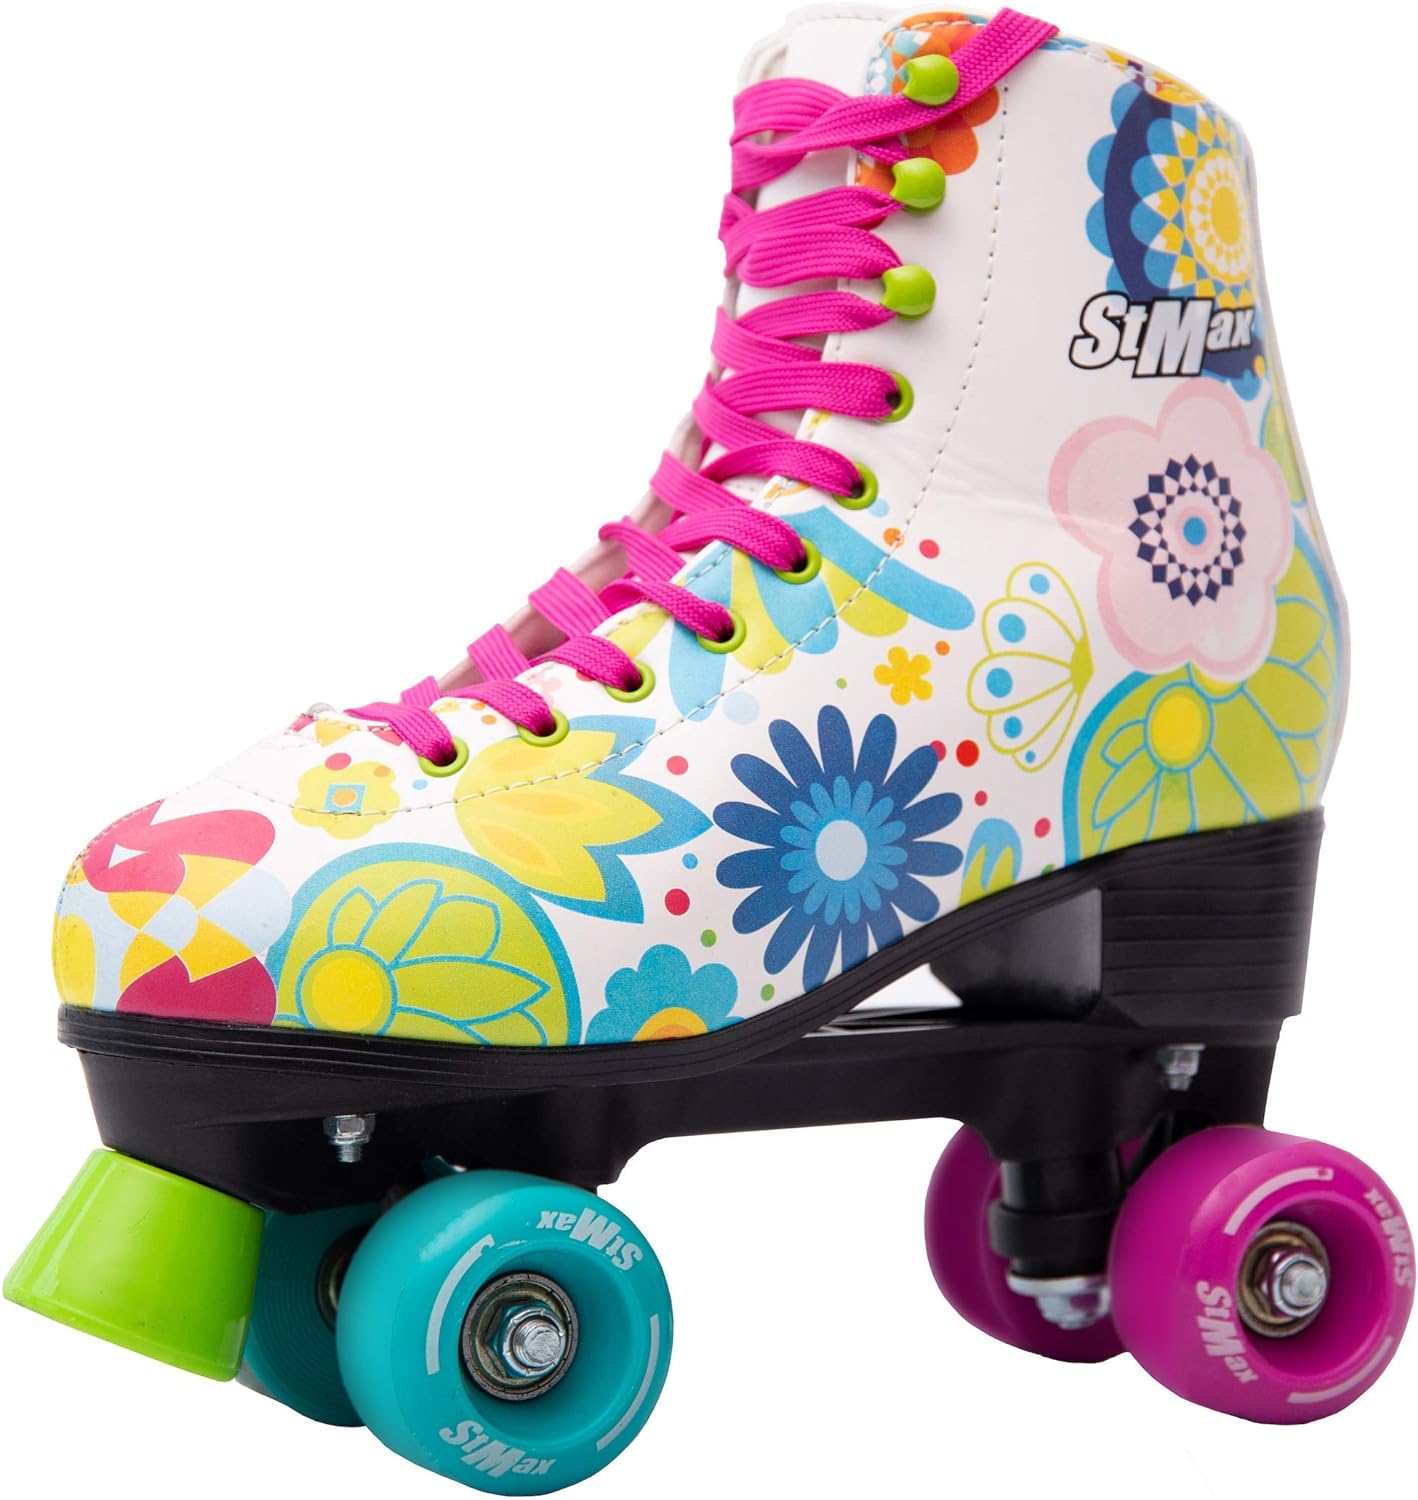 Quad Roller Skates for Girls and Women Size 4.5 Adult White and pink Heart Derby 